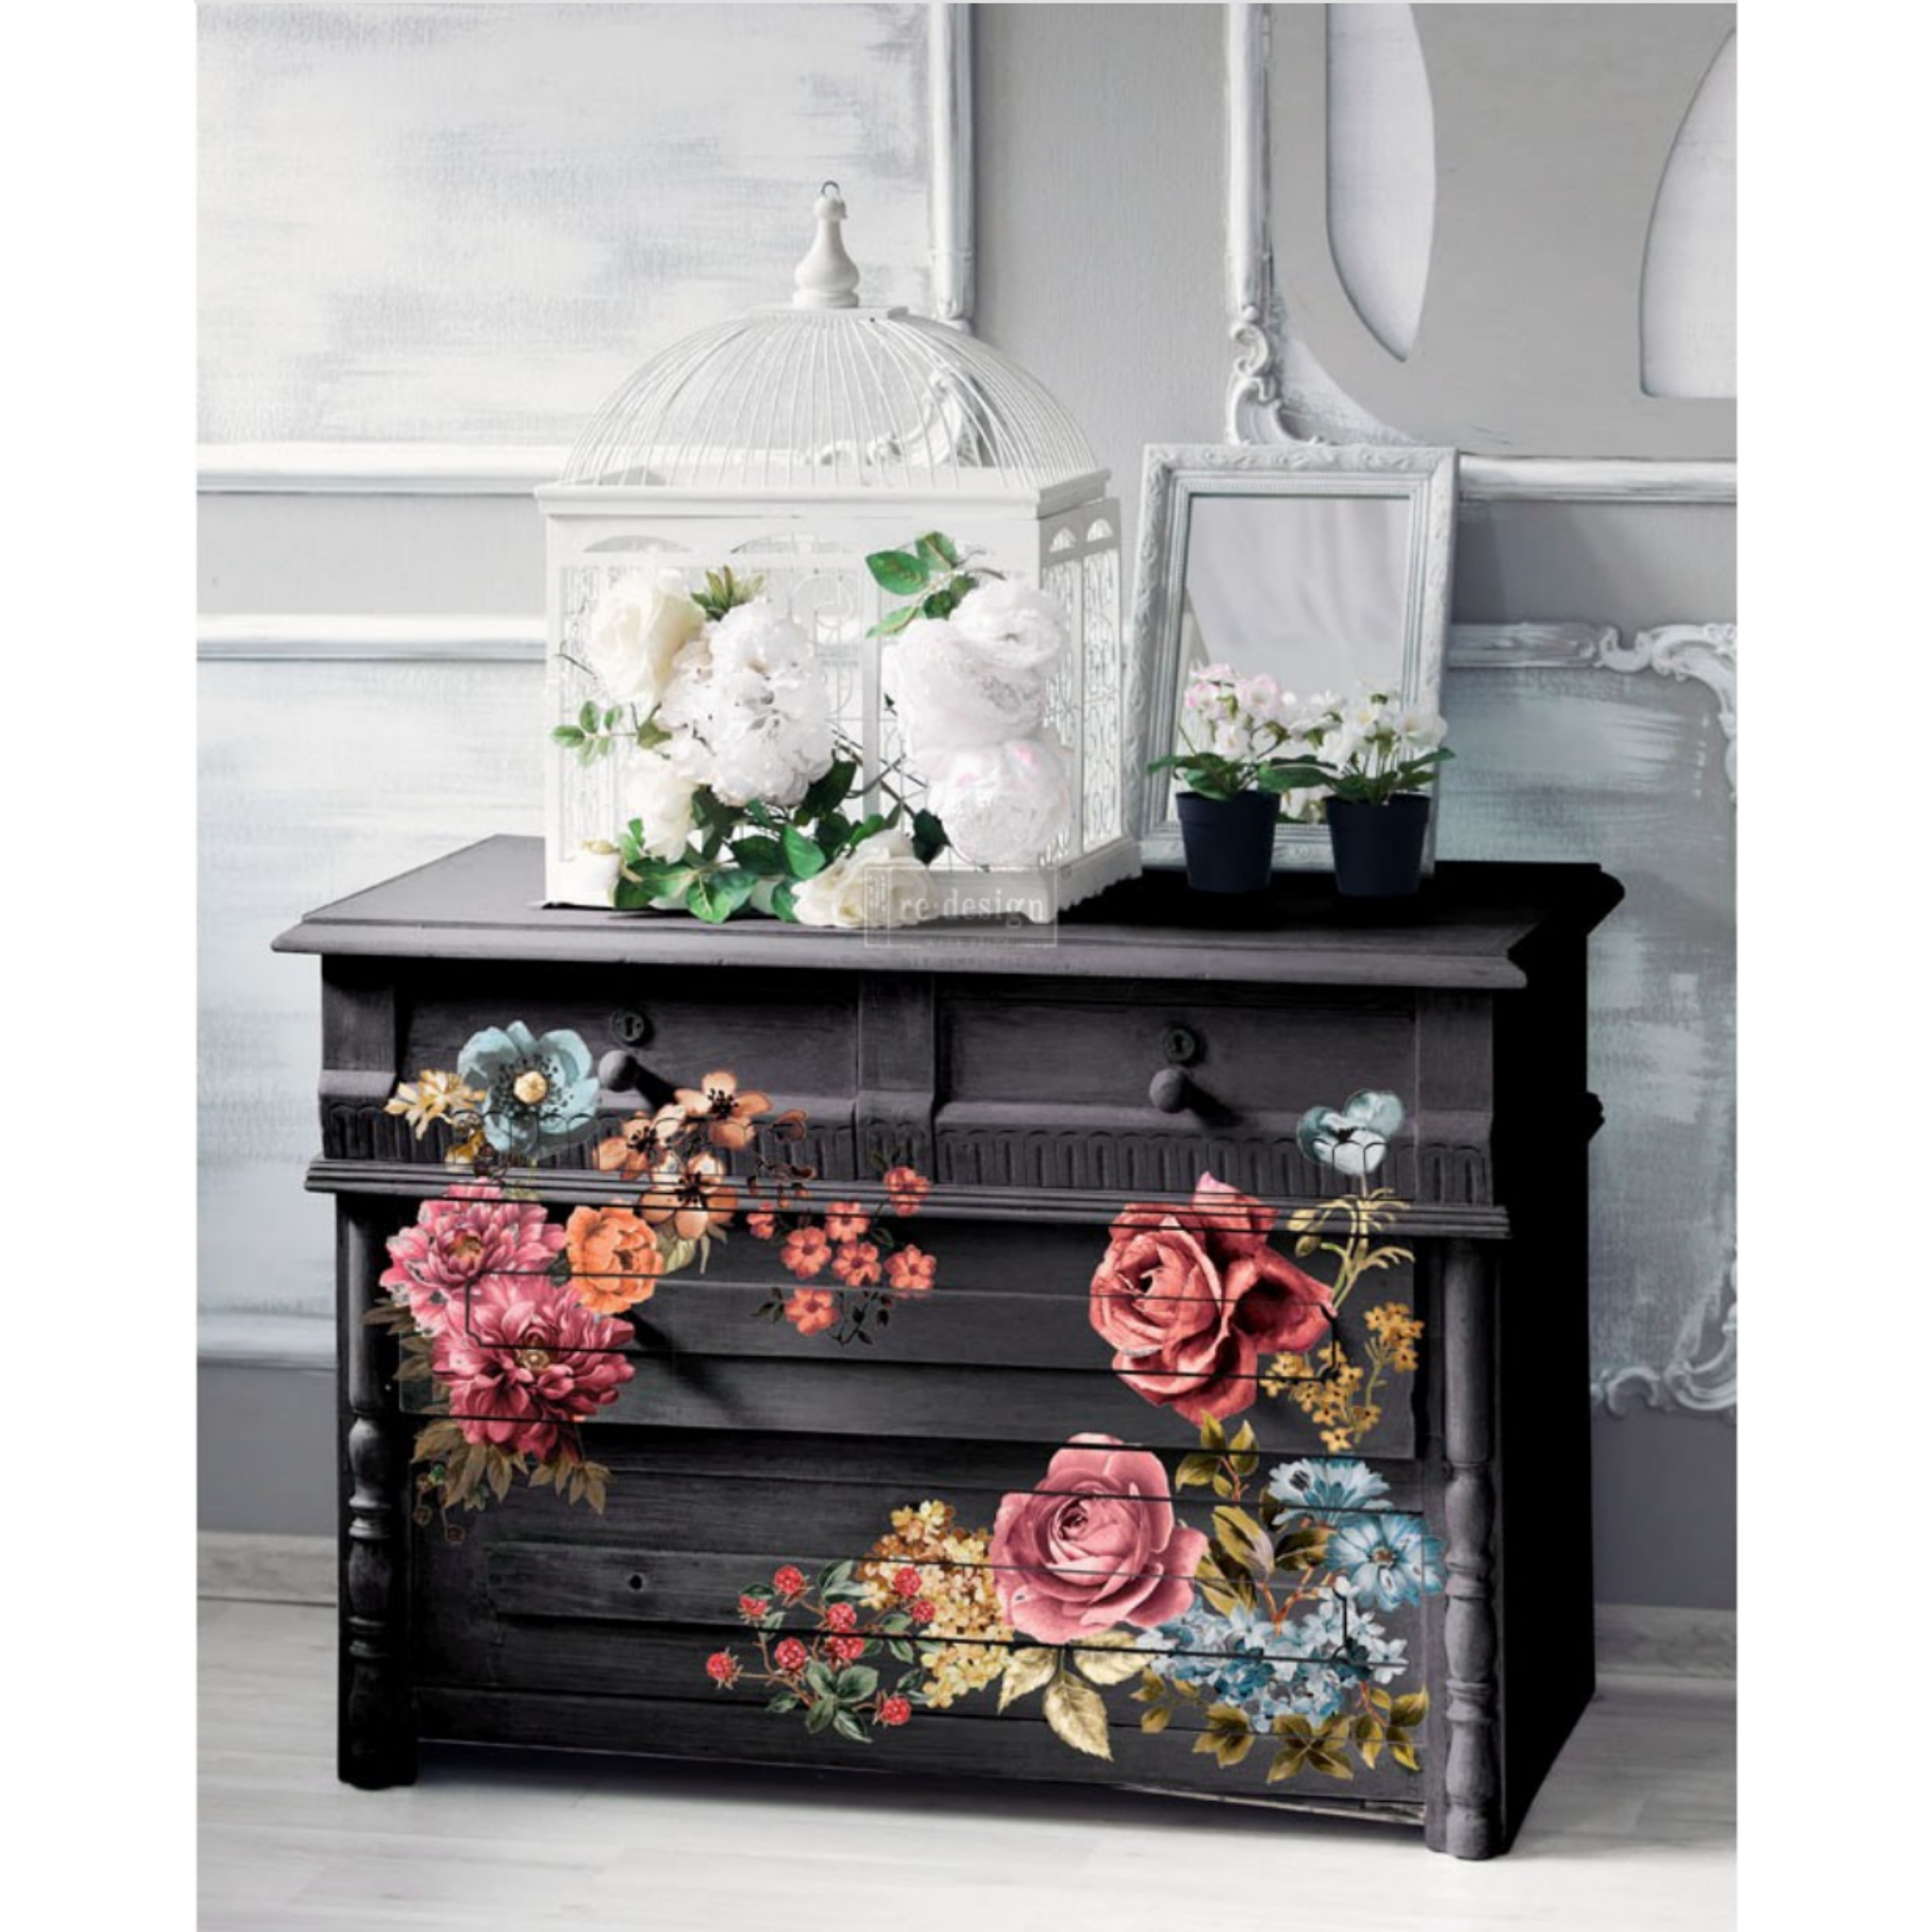 A black dresser features ReDesign with Prima's Ruby Rose on its drawers.